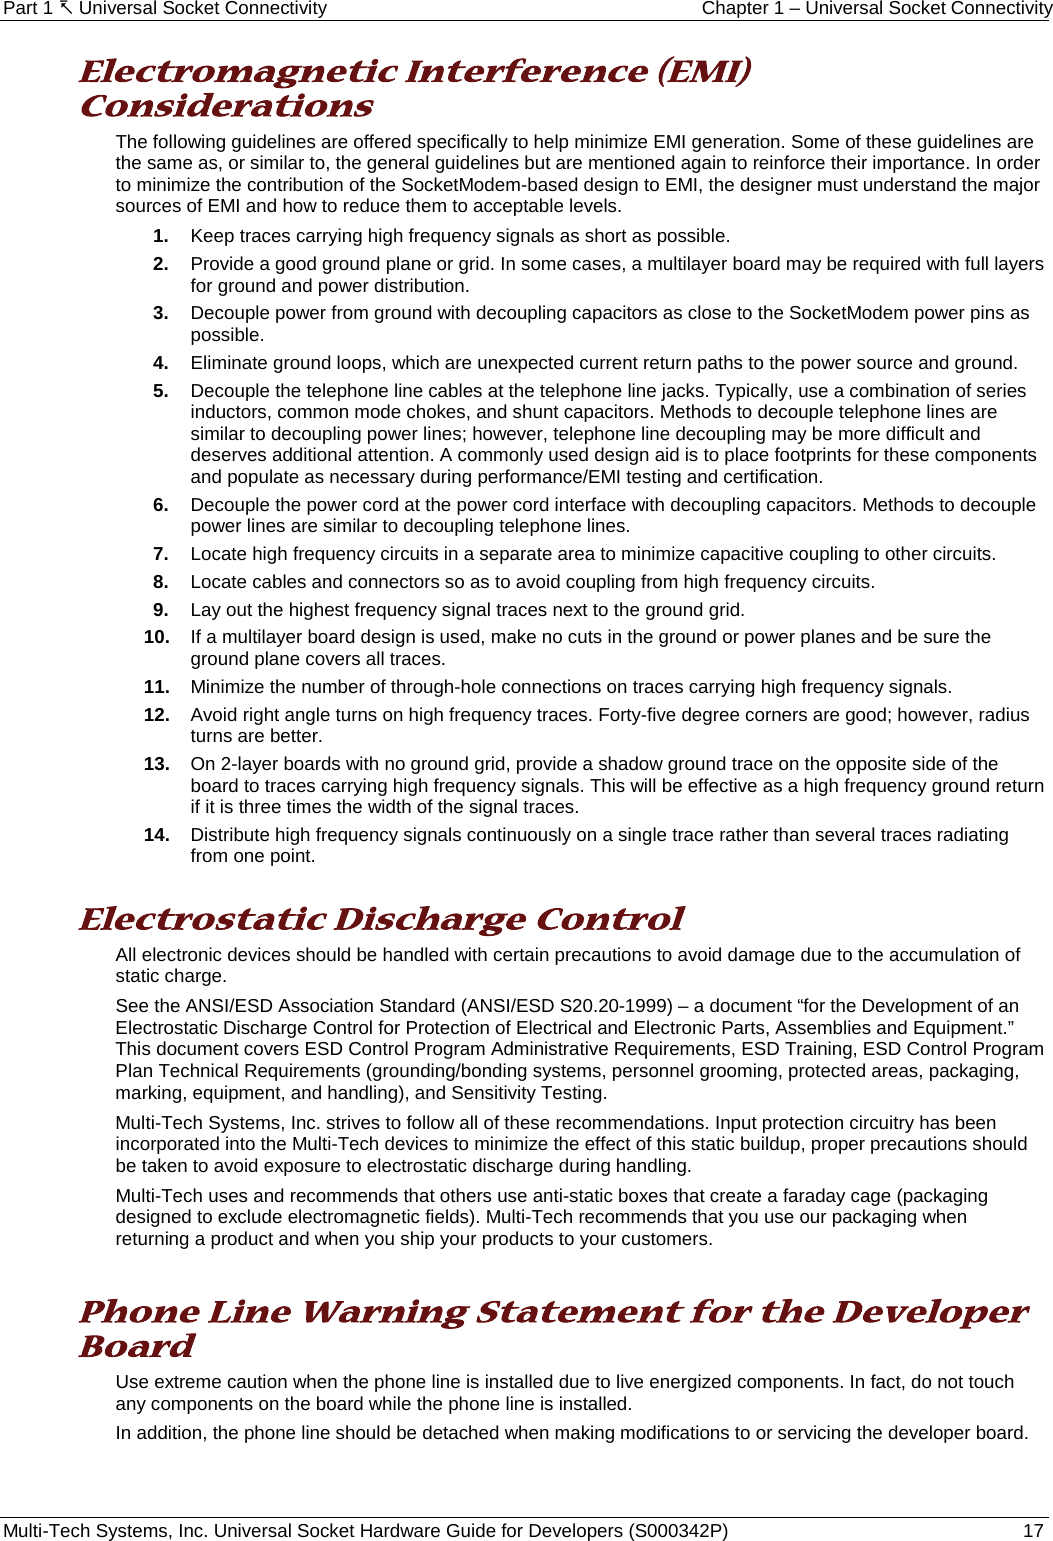 Part 1  Universal Socket Connectivity Chapter 1 – Universal Socket Connectivity Multi-Tech Systems, Inc. Universal Socket Hardware Guide for Developers (S000342P)  17  Electromagnetic Interference (EMI) Considerations The following guidelines are offered specifically to help minimize EMI generation. Some of these guidelines are the same as, or similar to, the general guidelines but are mentioned again to reinforce their importance. In order to minimize the contribution of the SocketModem-based design to EMI, the designer must understand the major sources of EMI and how to reduce them to acceptable levels.  1. Keep traces carrying high frequency signals as short as possible. 2. Provide a good ground plane or grid. In some cases, a multilayer board may be required with full layers for ground and power distribution. 3. Decouple power from ground with decoupling capacitors as close to the SocketModem power pins as possible. 4. Eliminate ground loops, which are unexpected current return paths to the power source and ground. 5. Decouple the telephone line cables at the telephone line jacks. Typically, use a combination of series inductors, common mode chokes, and shunt capacitors. Methods to decouple telephone lines are similar to decoupling power lines; however, telephone line decoupling may be more difficult and deserves additional attention. A commonly used design aid is to place footprints for these components and populate as necessary during performance/EMI testing and certification. 6. Decouple the power cord at the power cord interface with decoupling capacitors. Methods to decouple power lines are similar to decoupling telephone lines. 7. Locate high frequency circuits in a separate area to minimize capacitive coupling to other circuits. 8. Locate cables and connectors so as to avoid coupling from high frequency circuits. 9. Lay out the highest frequency signal traces next to the ground grid. 10. If a multilayer board design is used, make no cuts in the ground or power planes and be sure the ground plane covers all traces. 11. Minimize the number of through-hole connections on traces carrying high frequency signals. 12. Avoid right angle turns on high frequency traces. Forty-five degree corners are good; however, radius turns are better. 13. On 2-layer boards with no ground grid, provide a shadow ground trace on the opposite side of the board to traces carrying high frequency signals. This will be effective as a high frequency ground return if it is three times the width of the signal traces. 14. Distribute high frequency signals continuously on a single trace rather than several traces radiating from one point.  Electrostatic Discharge Control All electronic devices should be handled with certain precautions to avoid damage due to the accumulation of static charge.  See the ANSI/ESD Association Standard (ANSI/ESD S20.20-1999) – a document “for the Development of an Electrostatic Discharge Control for Protection of Electrical and Electronic Parts, Assemblies and Equipment.” This document covers ESD Control Program Administrative Requirements, ESD Training, ESD Control Program Plan Technical Requirements (grounding/bonding systems, personnel grooming, protected areas, packaging, marking, equipment, and handling), and Sensitivity Testing. Multi-Tech Systems, Inc. strives to follow all of these recommendations. Input protection circuitry has been incorporated into the Multi-Tech devices to minimize the effect of this static buildup, proper precautions should be taken to avoid exposure to electrostatic discharge during handling.  Multi-Tech uses and recommends that others use anti-static boxes that create a faraday cage (packaging designed to exclude electromagnetic fields). Multi-Tech recommends that you use our packaging when returning a product and when you ship your products to your customers.  Phone Line Warning Statement for the Developer Board Use extreme caution when the phone line is installed due to live energized components. In fact, do not touch any components on the board while the phone line is installed.  In addition, the phone line should be detached when making modifications to or servicing the developer board.   